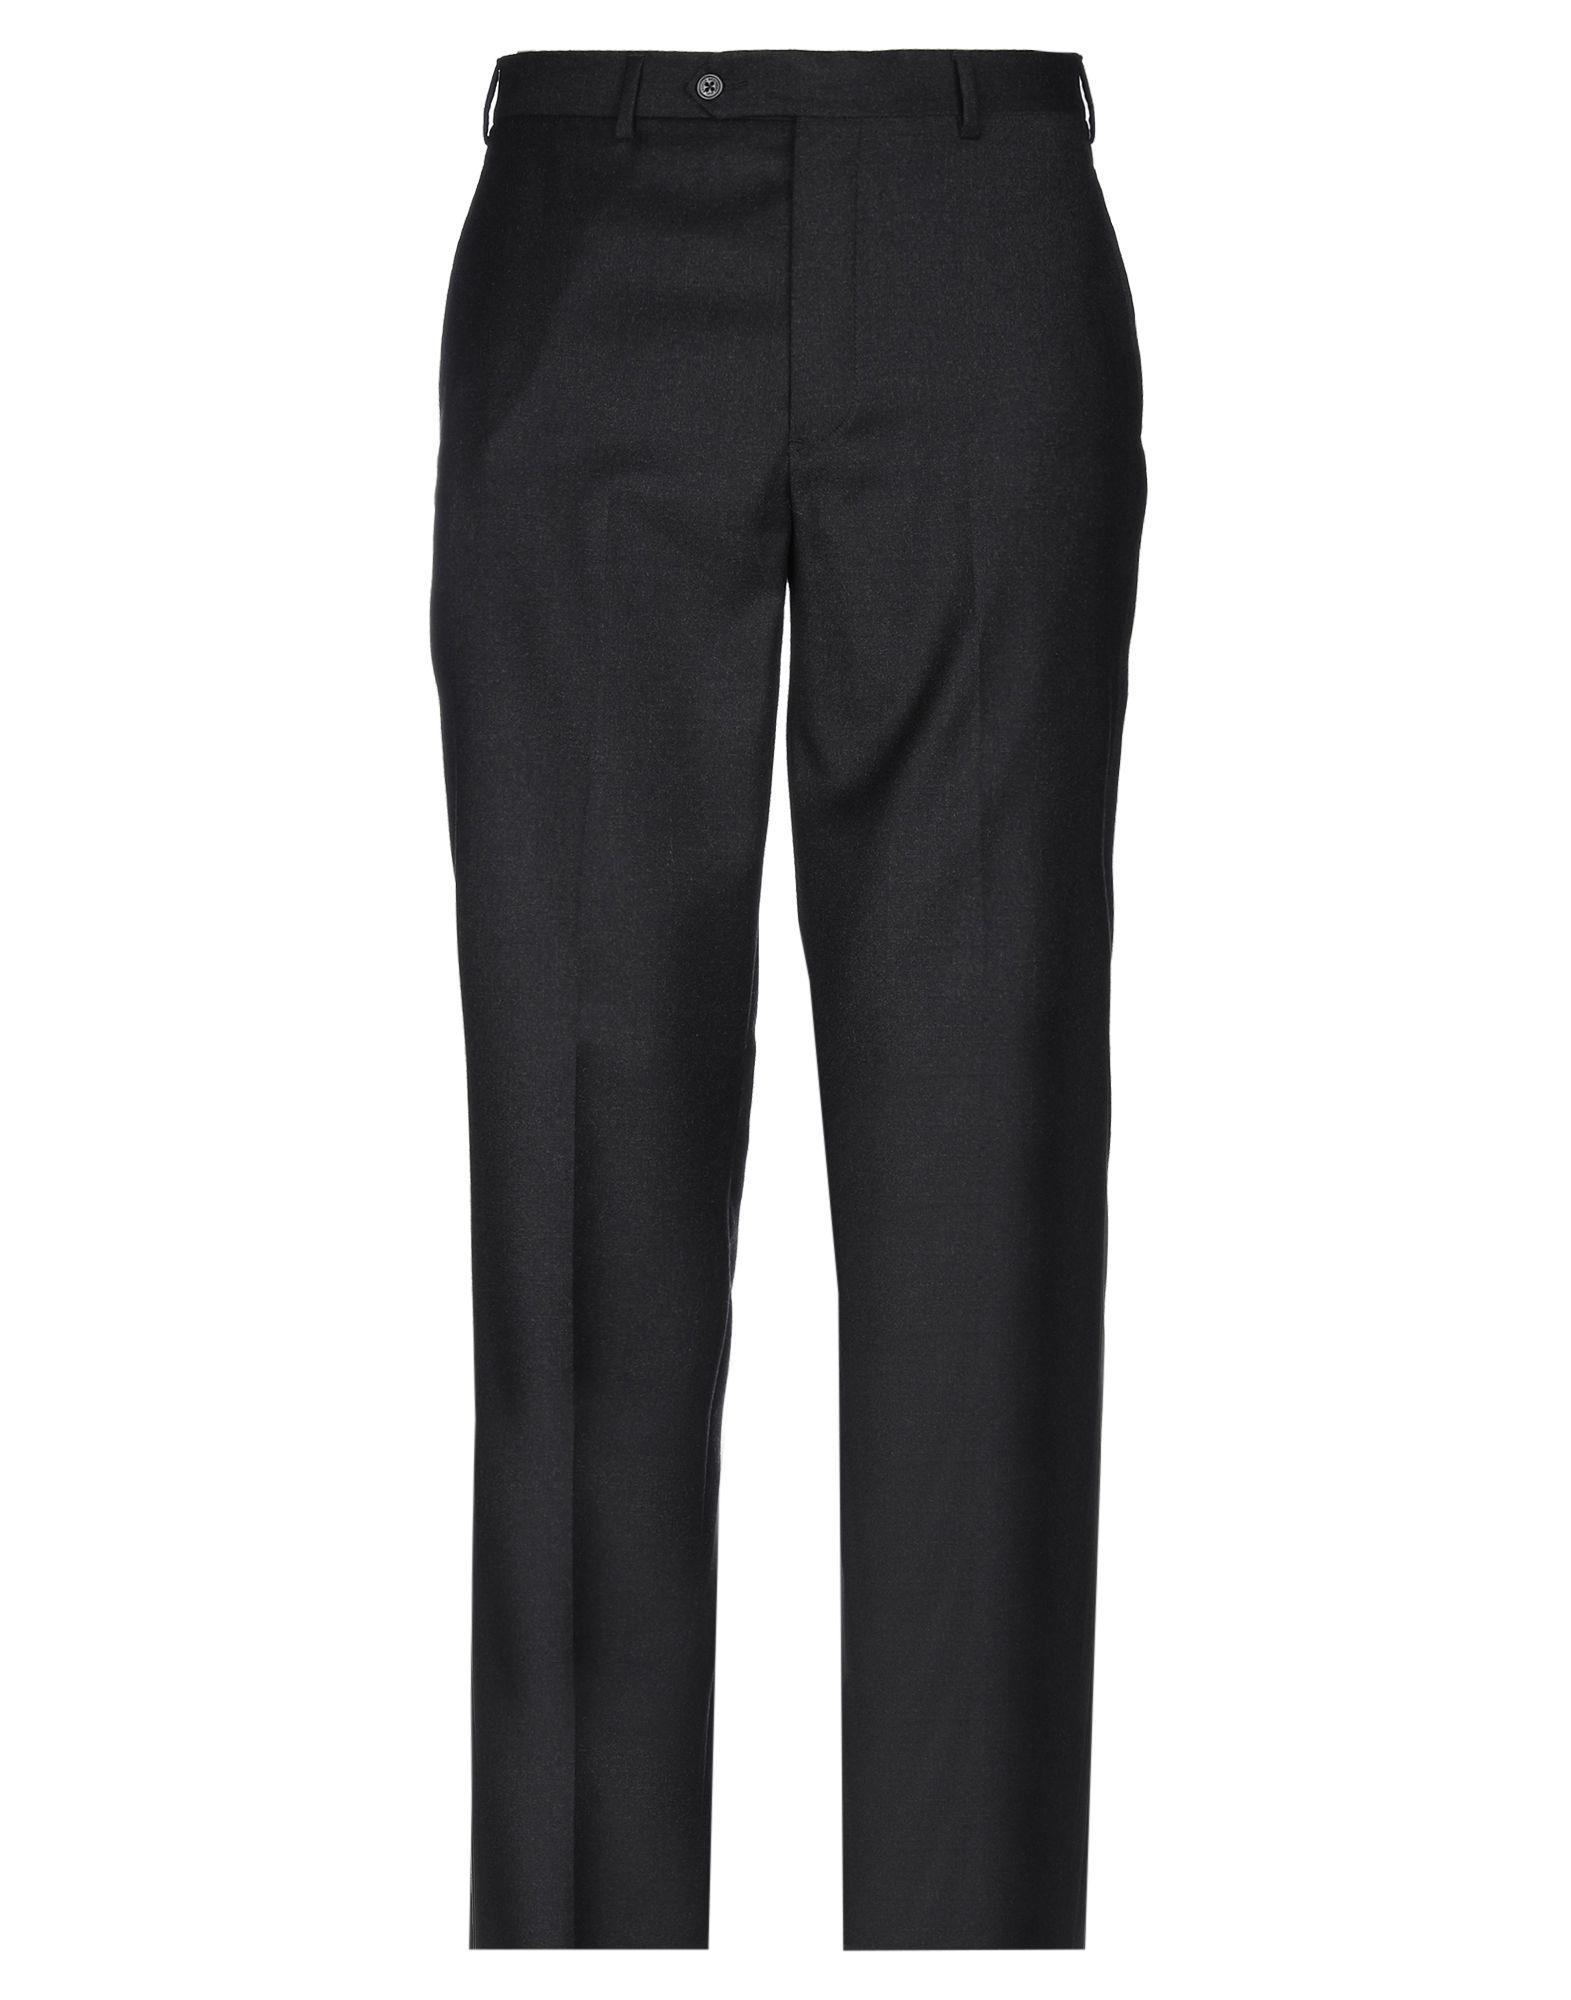 Brooks Brothers Casual Pants in Black for Men - Lyst